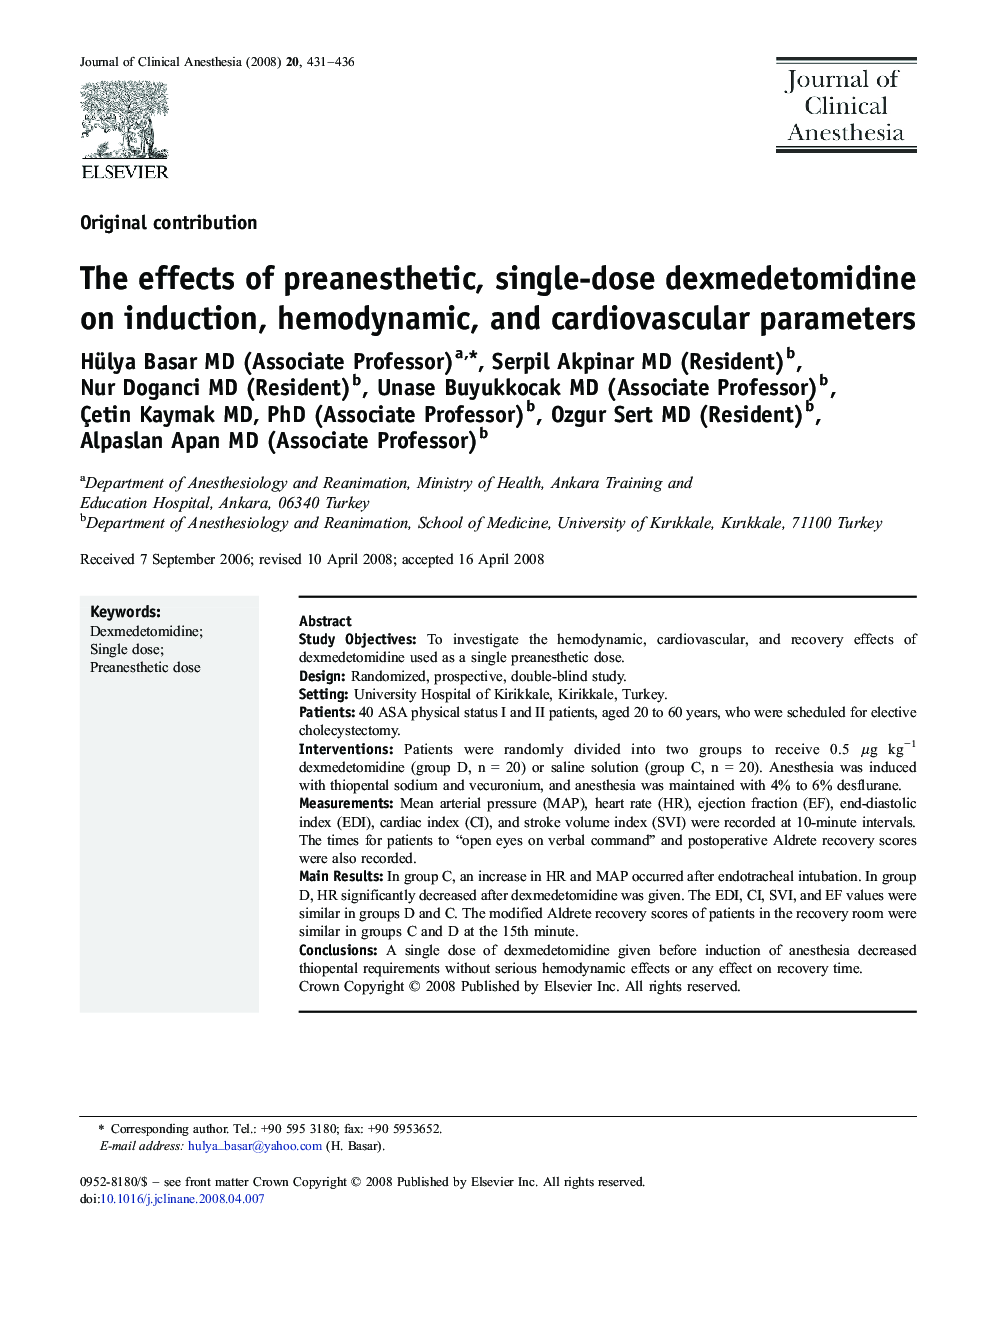 The effects of preanesthetic, single-dose dexmedetomidine on induction, hemodynamic, and cardiovascular parameters